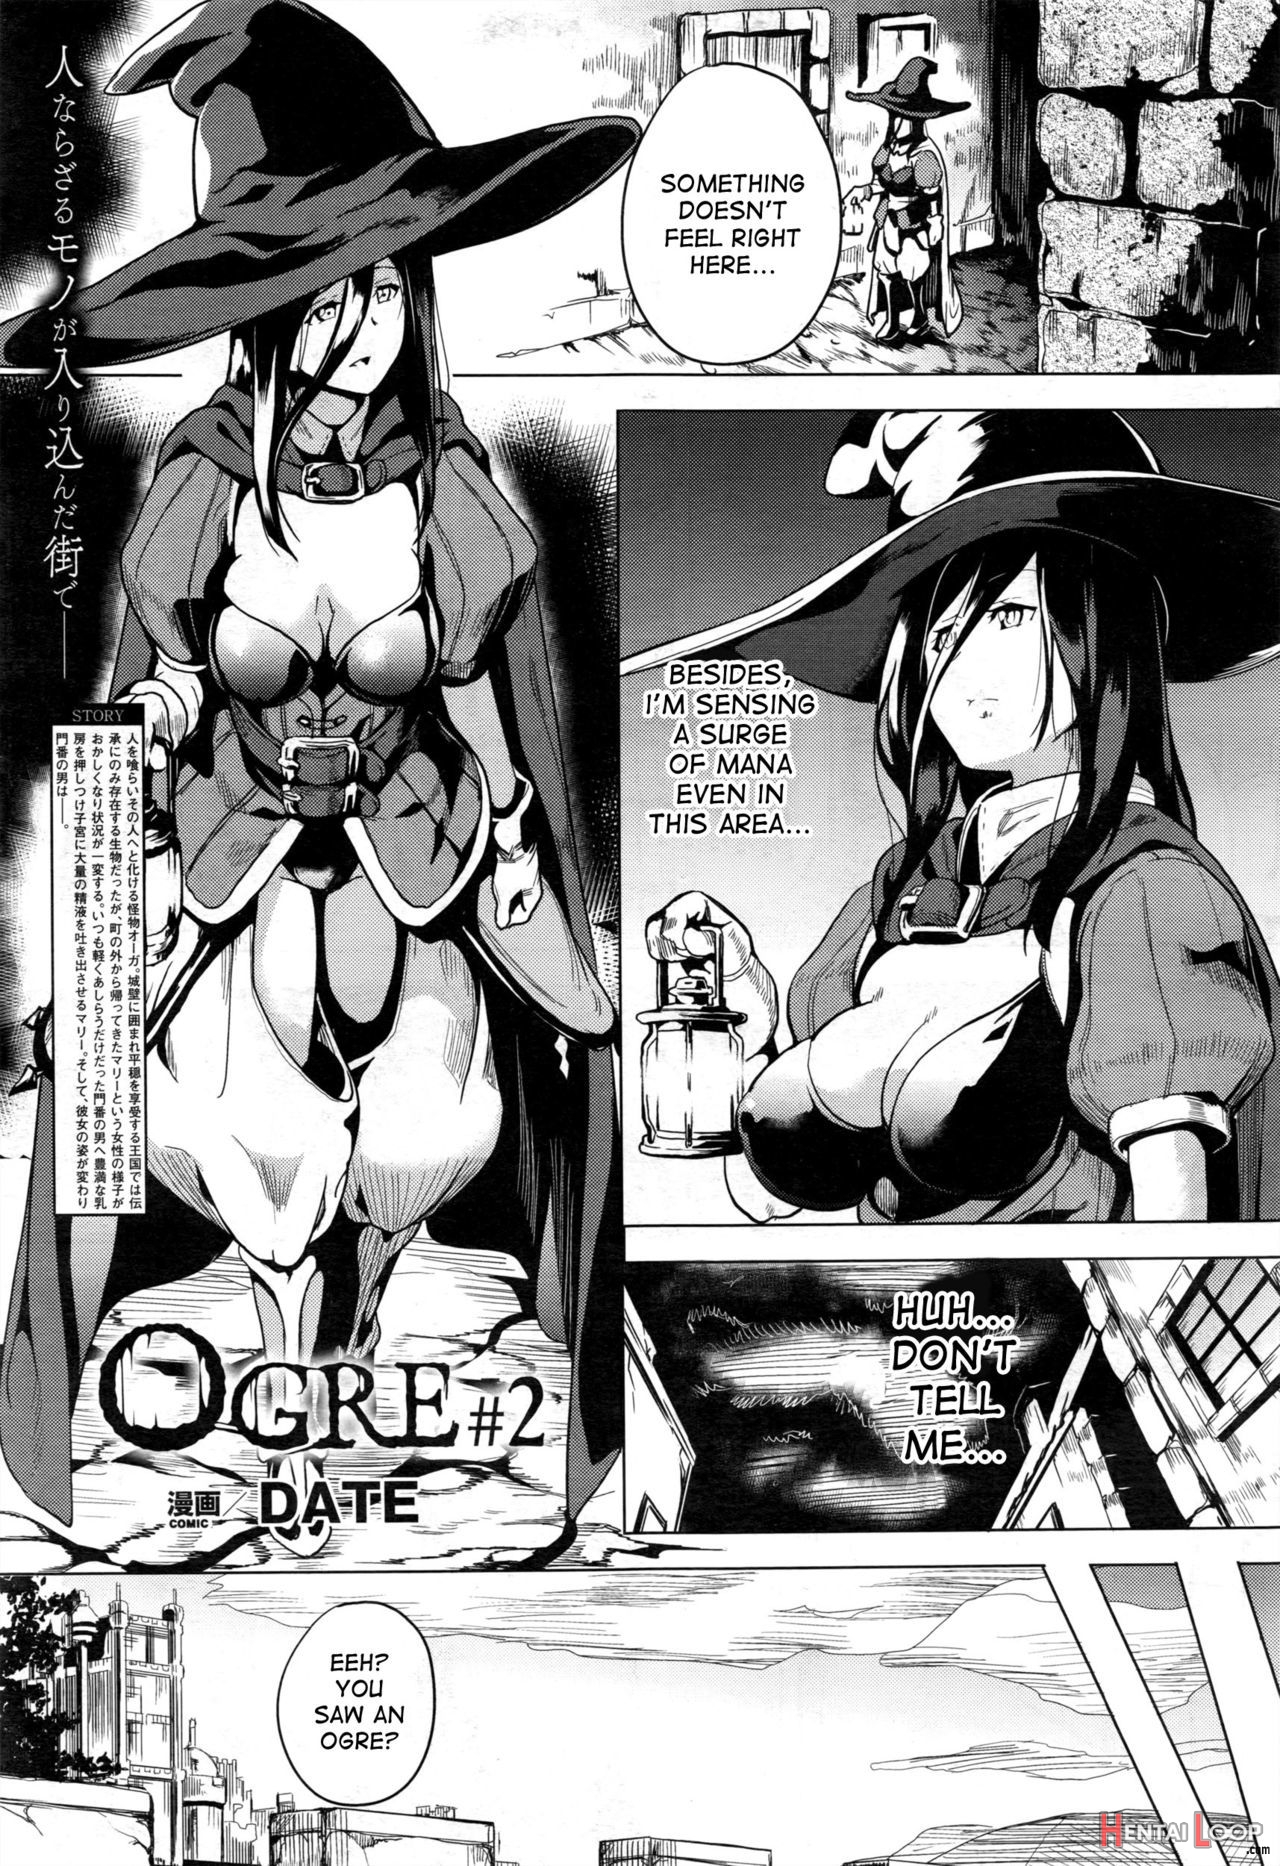 Ogre #2 page 1